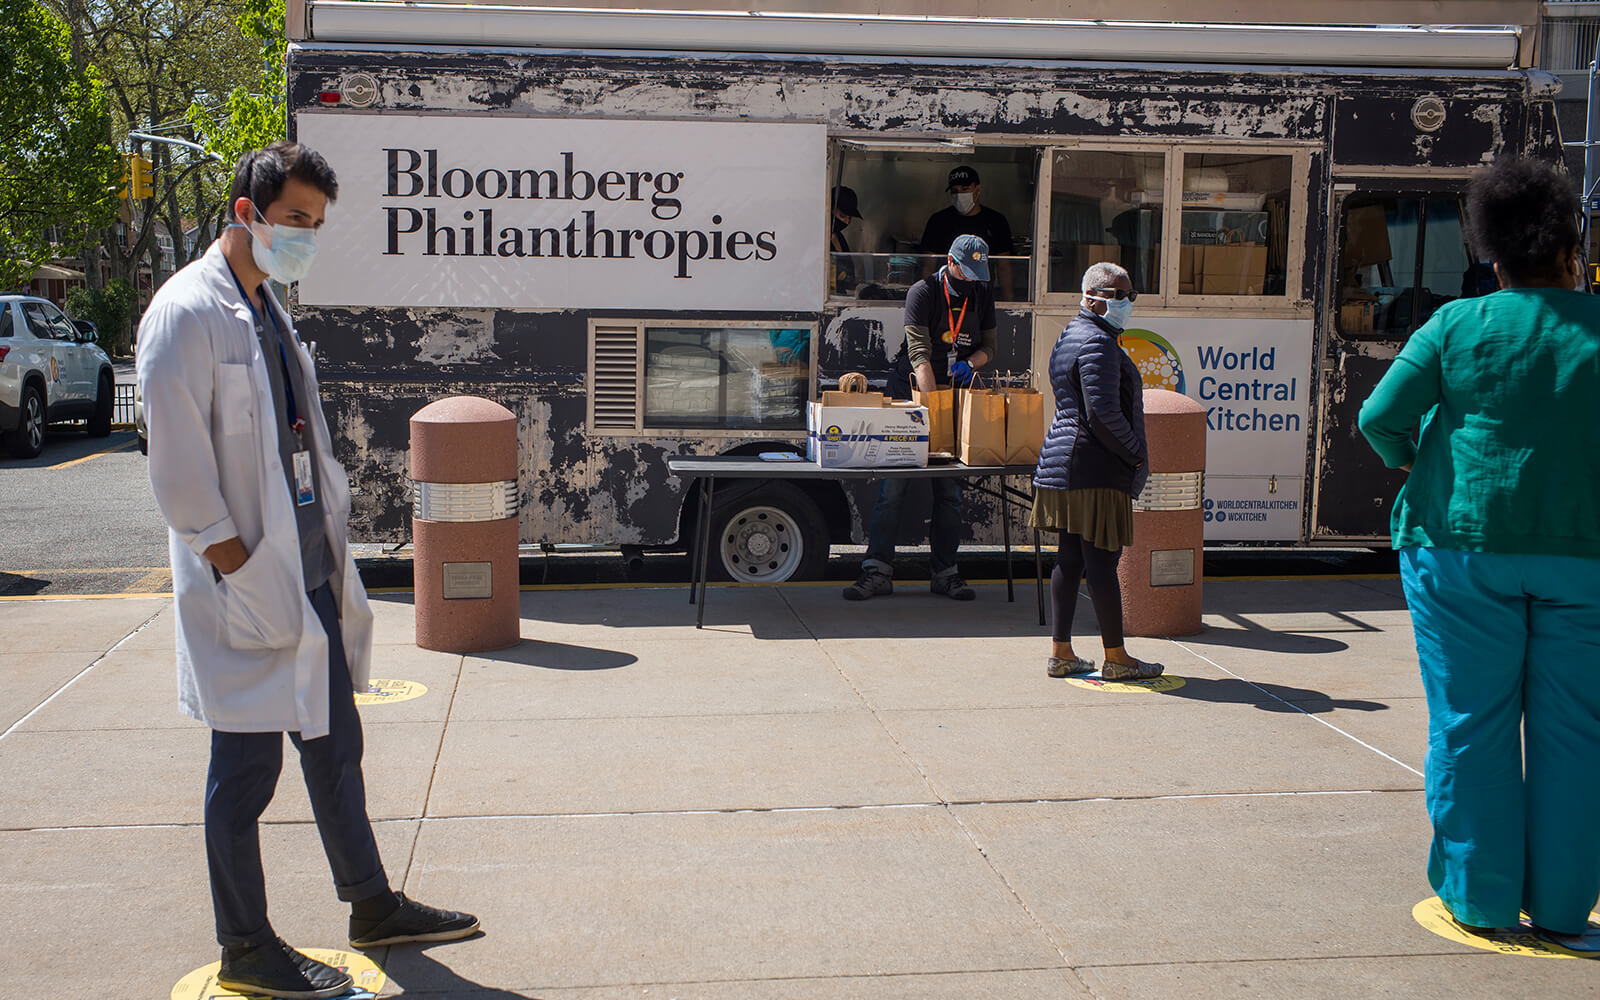 World Central Kitchen and Bloomberg Philanthropies have teamed up to feed hospital staff at Kings County Hospital in Brooklyn